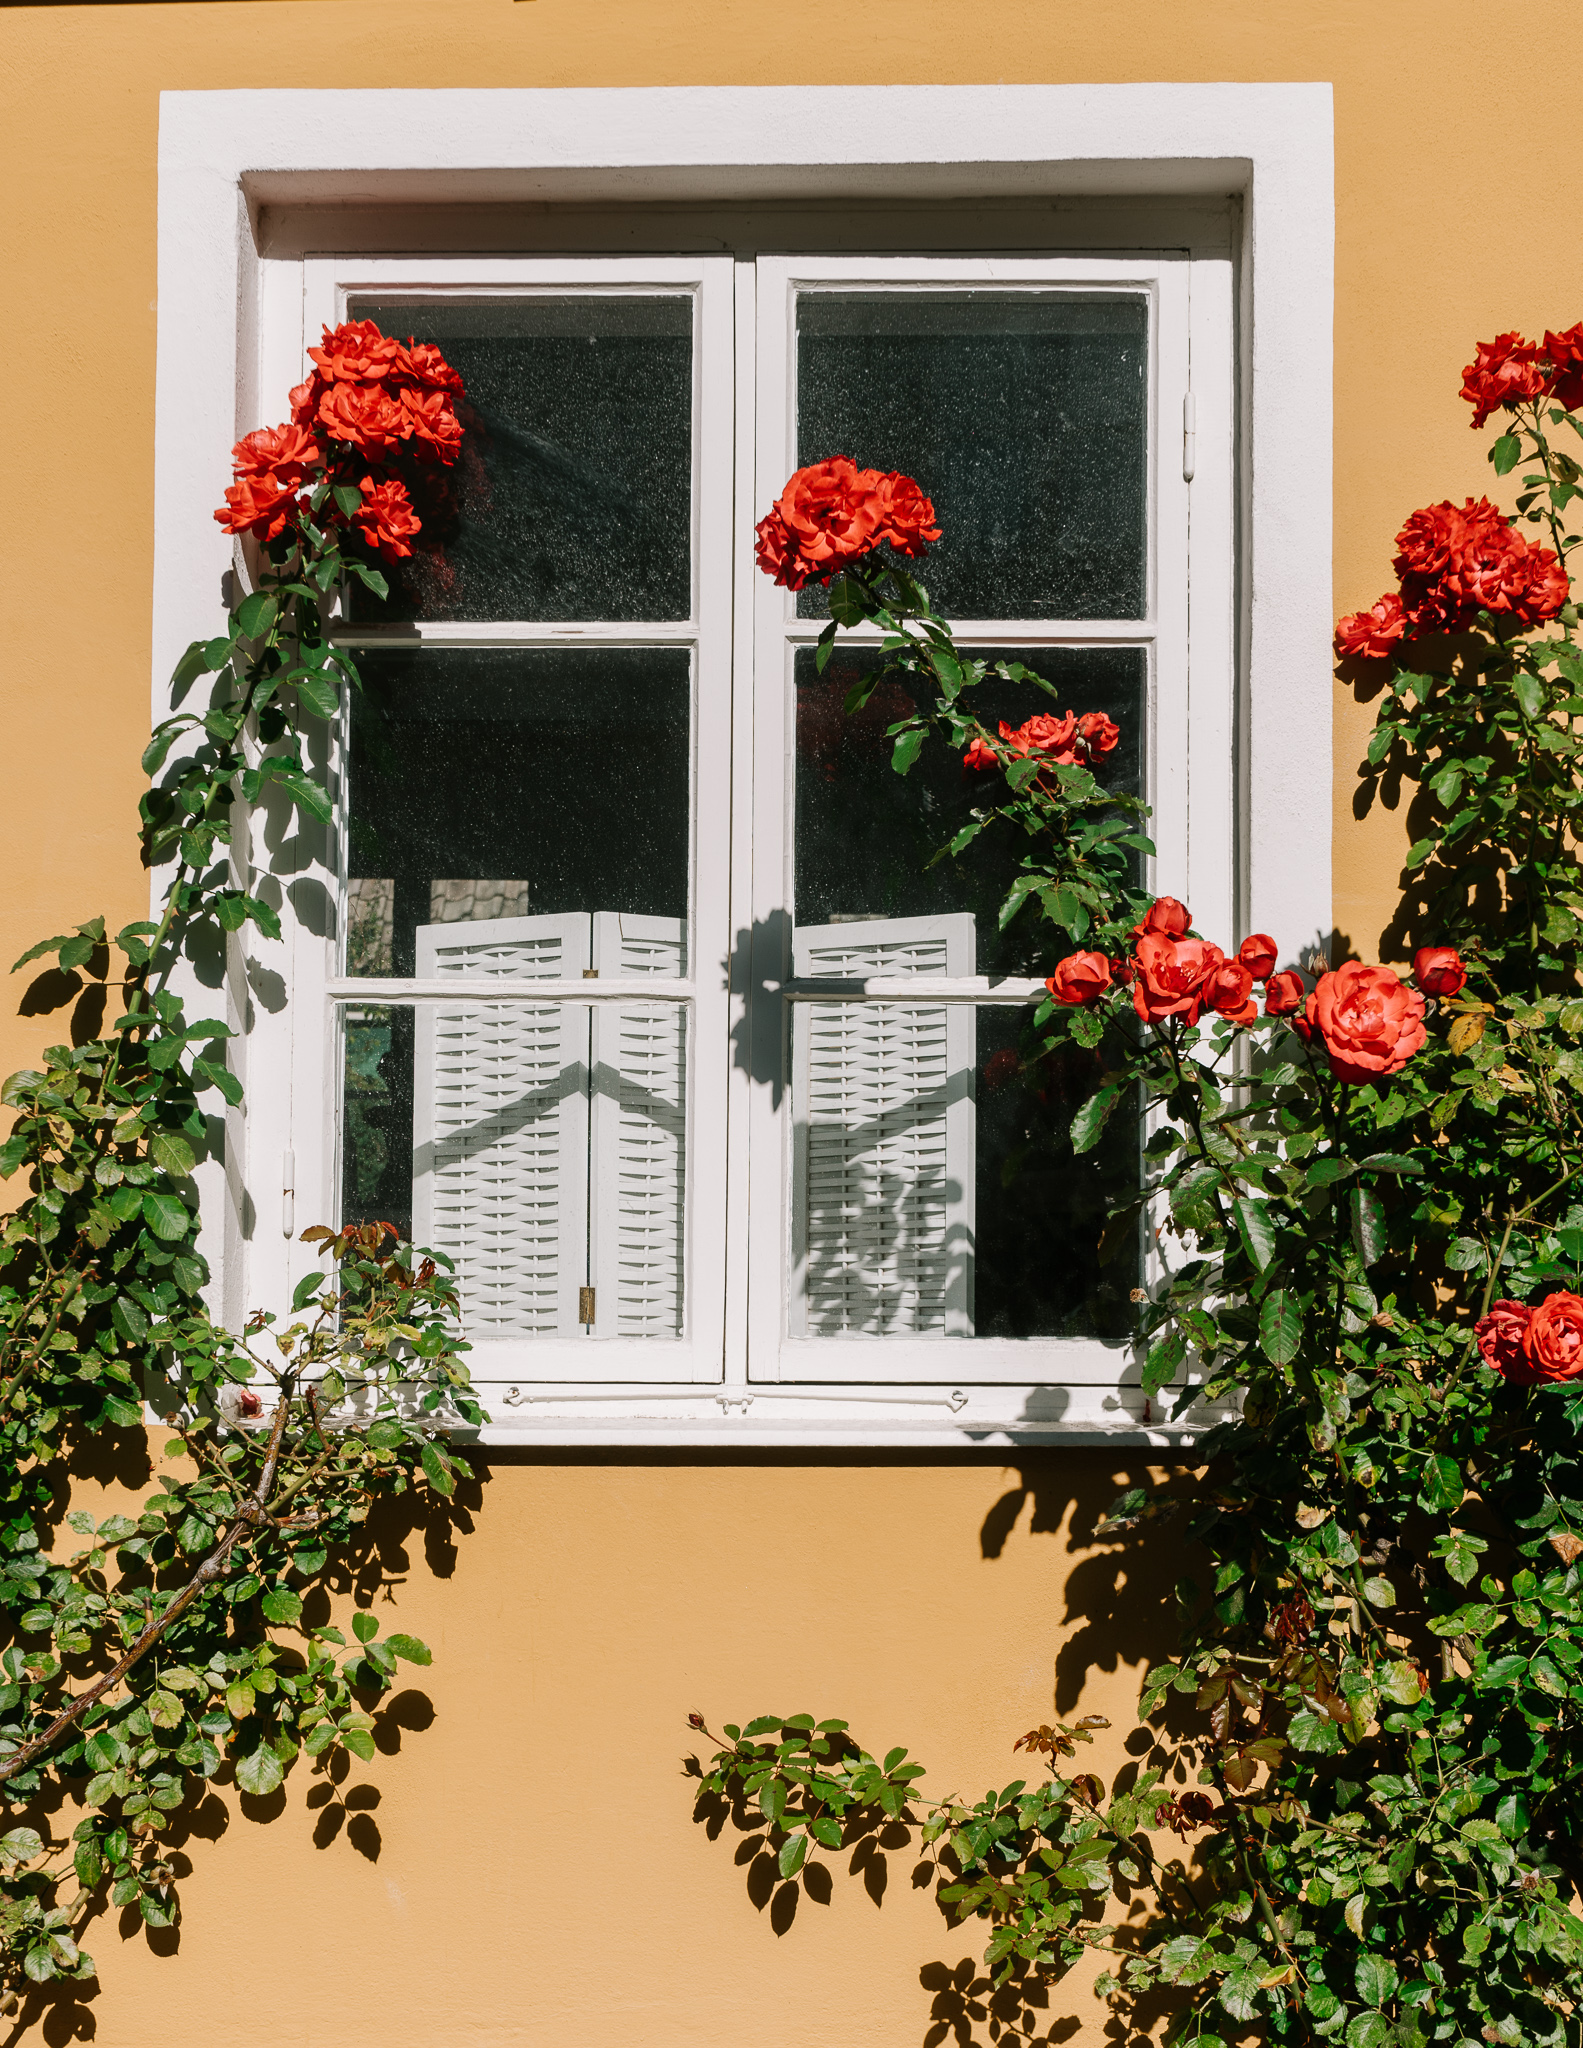 red roses on the side of a yellow building and a white window with shutters inside.